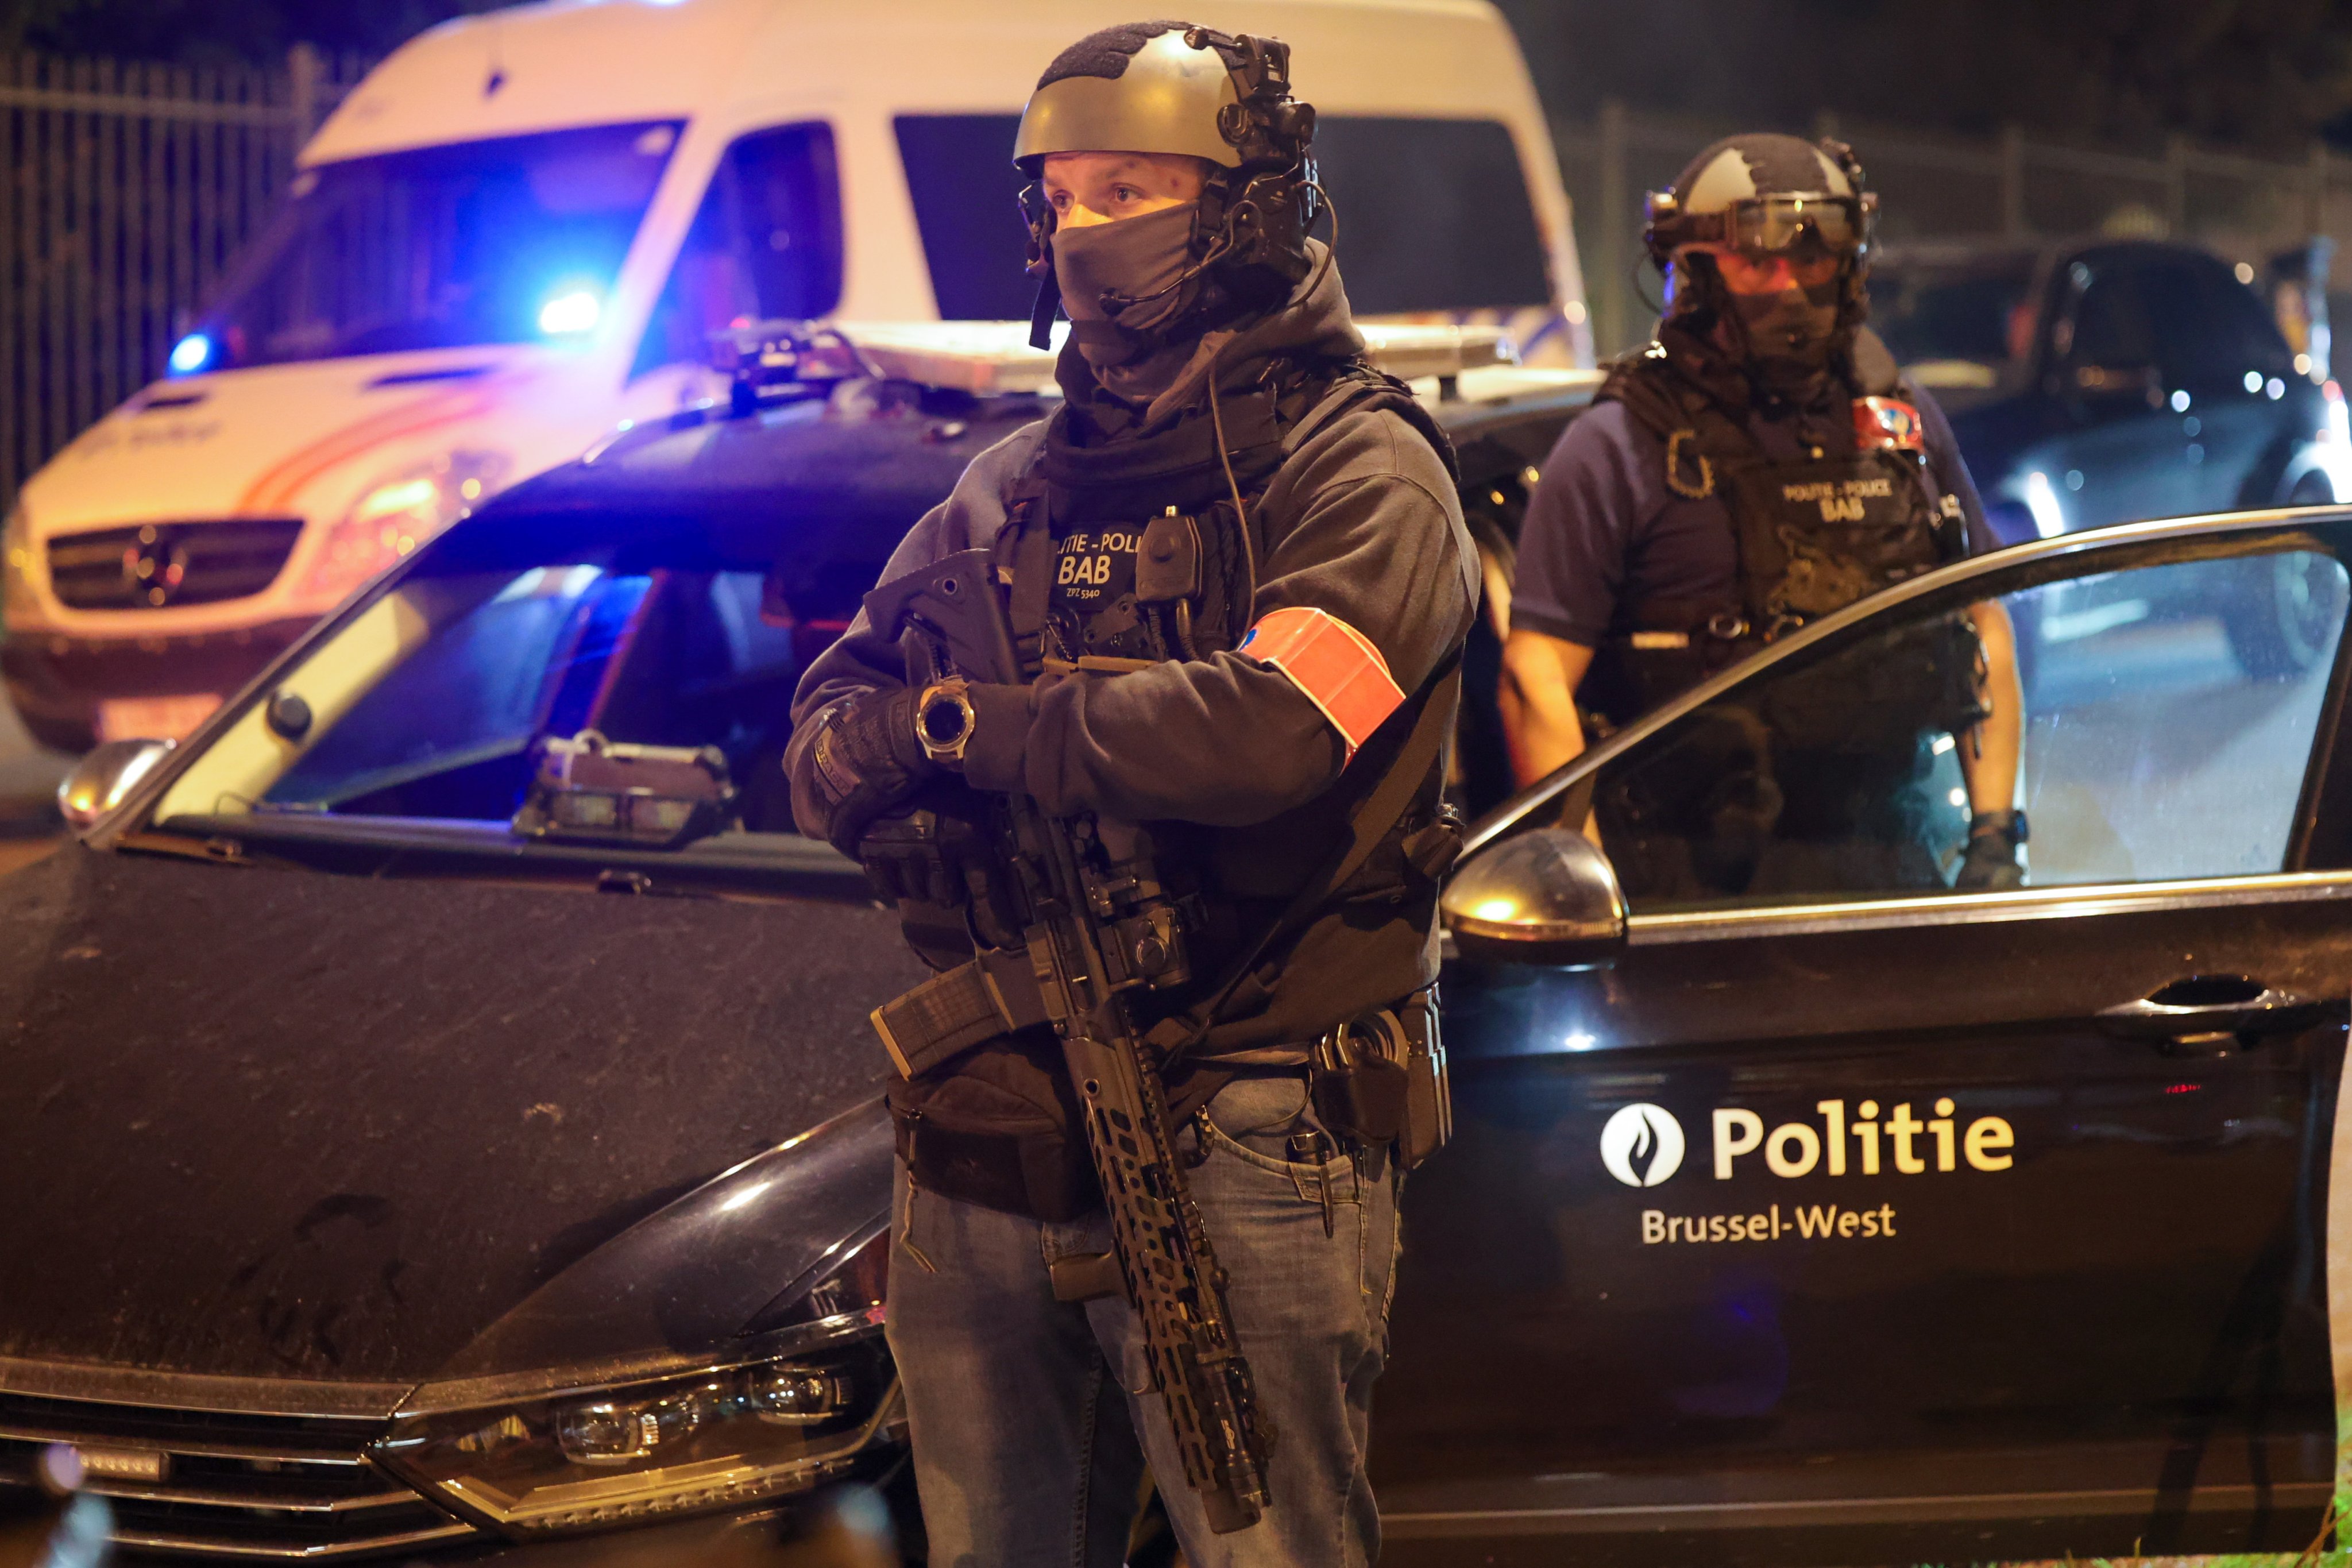 The attack came just before a Belgium-Sweden soccer match in Brussels on Monday night. Photo: EPA-EFE